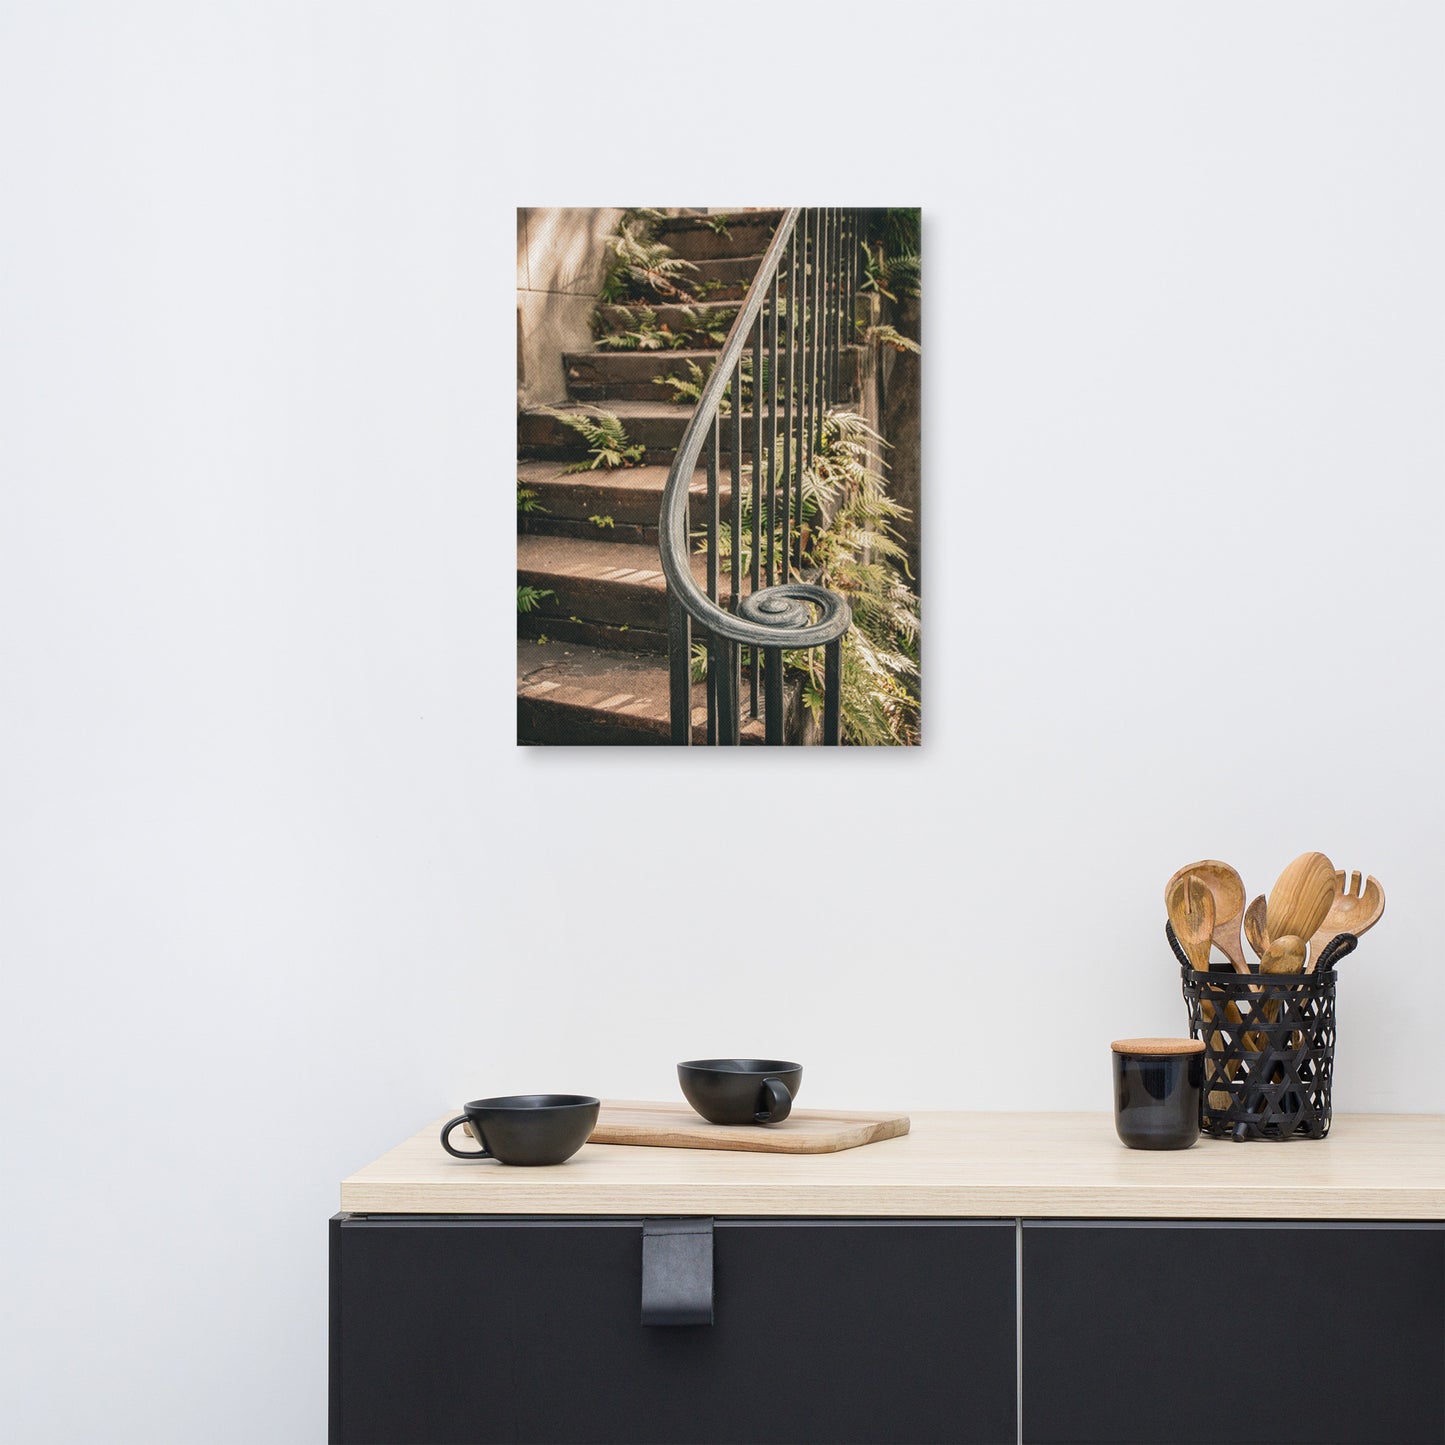 Old Stone Stairs And Cast Iron Banister Savannah GA Canvas Wall Art Prints